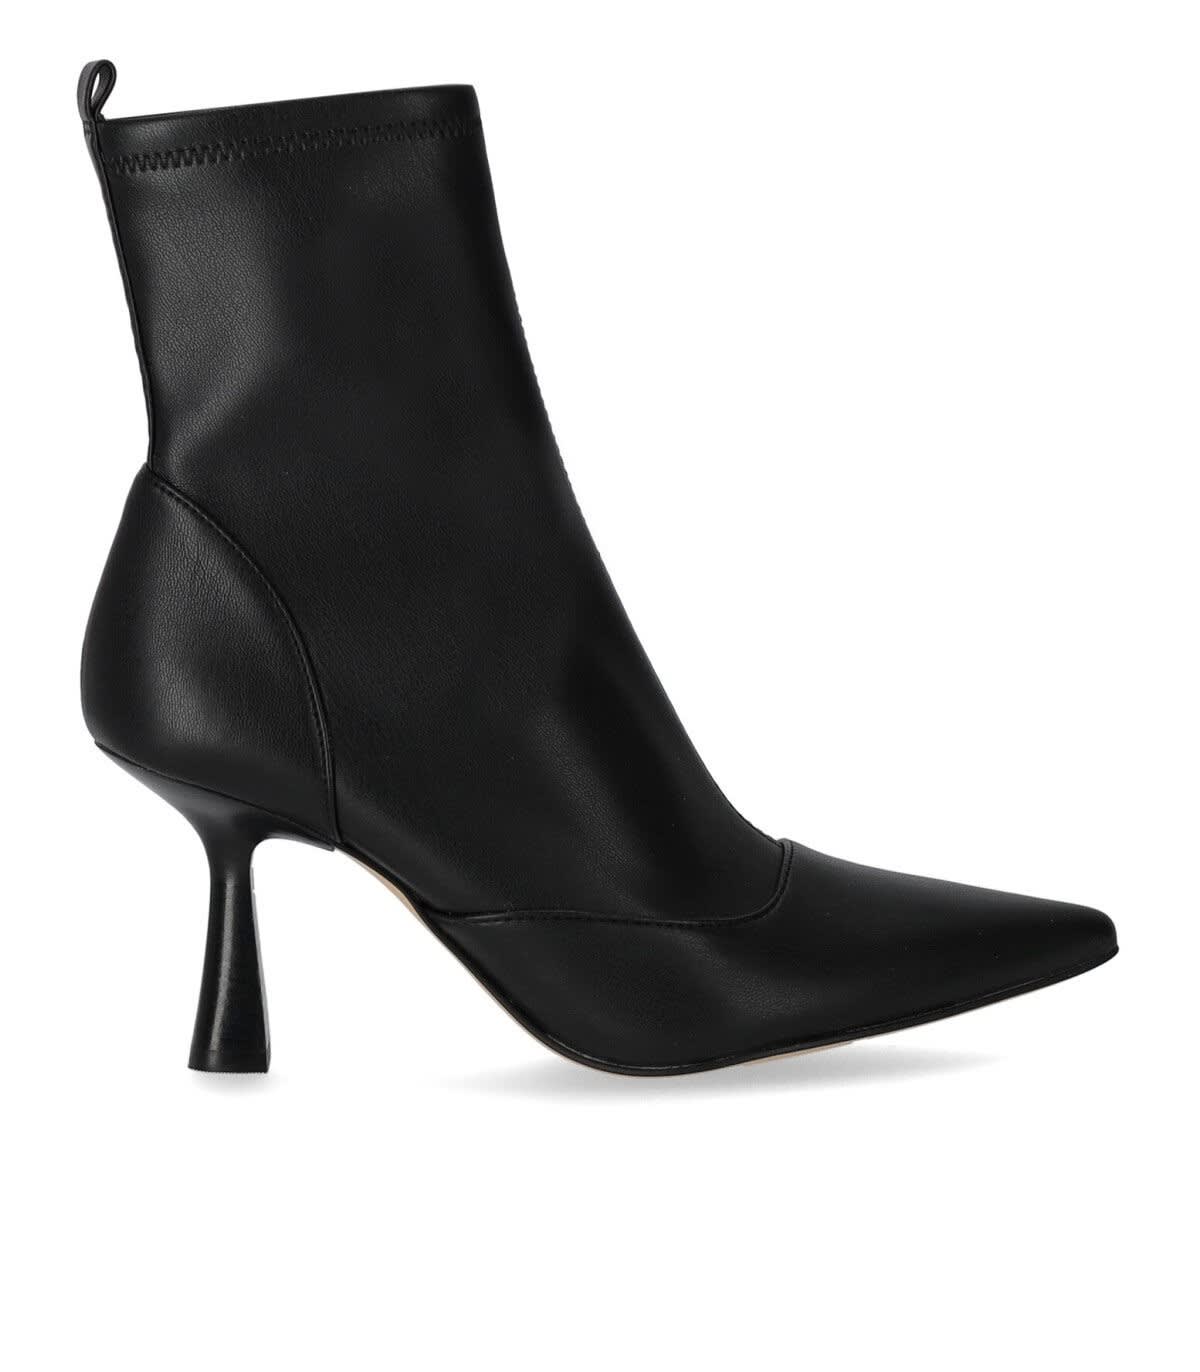 MICHAEL KORS CLARA BLACK LEATHER ANKLE BOOTS